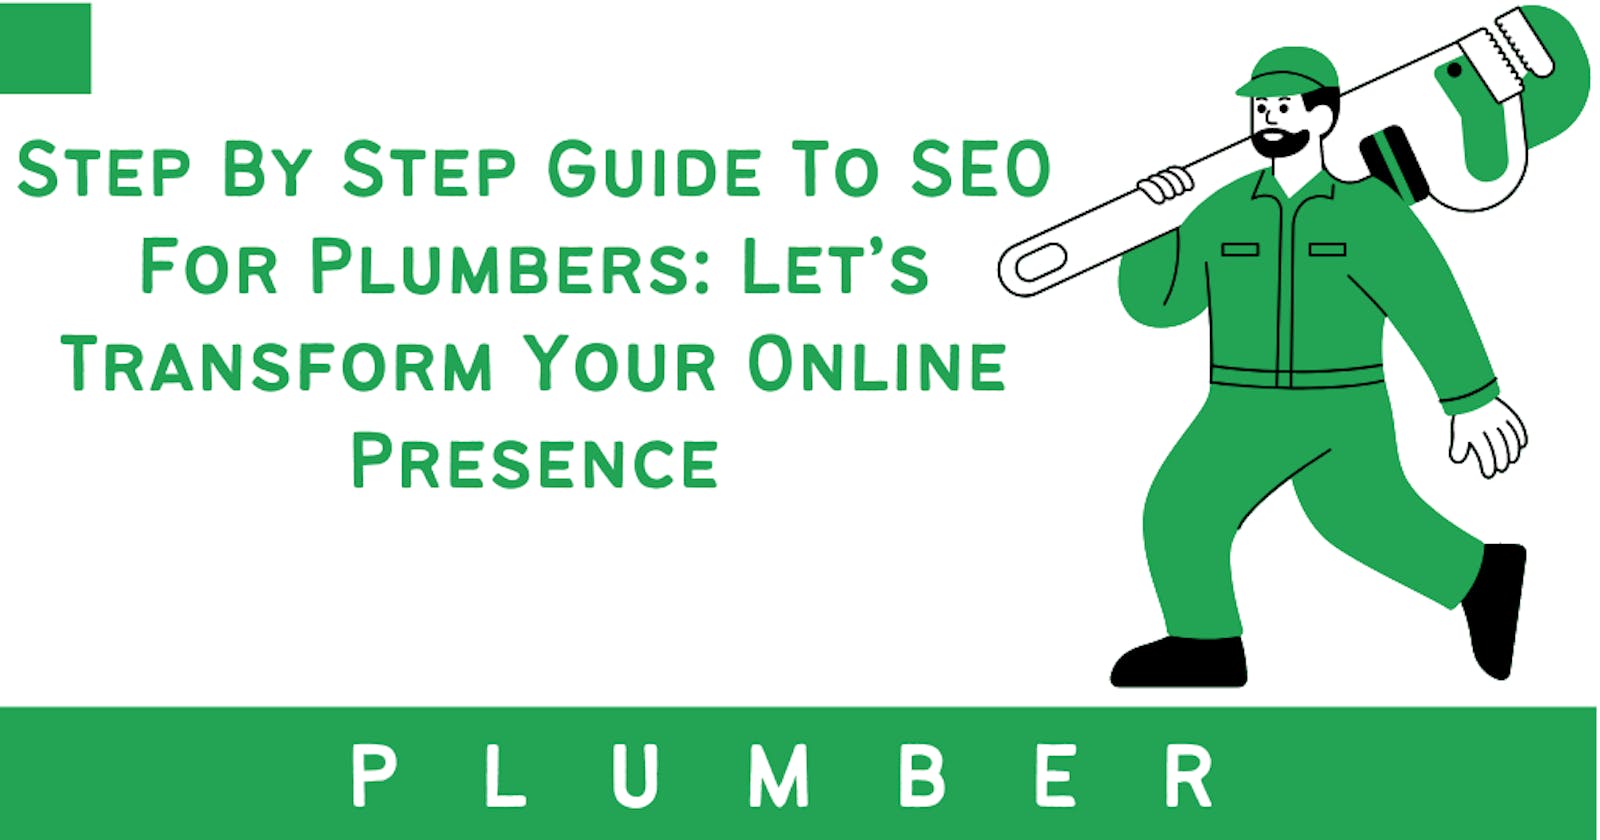 Step By Step Guide To SEO For Plumbers: Let’s Transform Your Online Presence